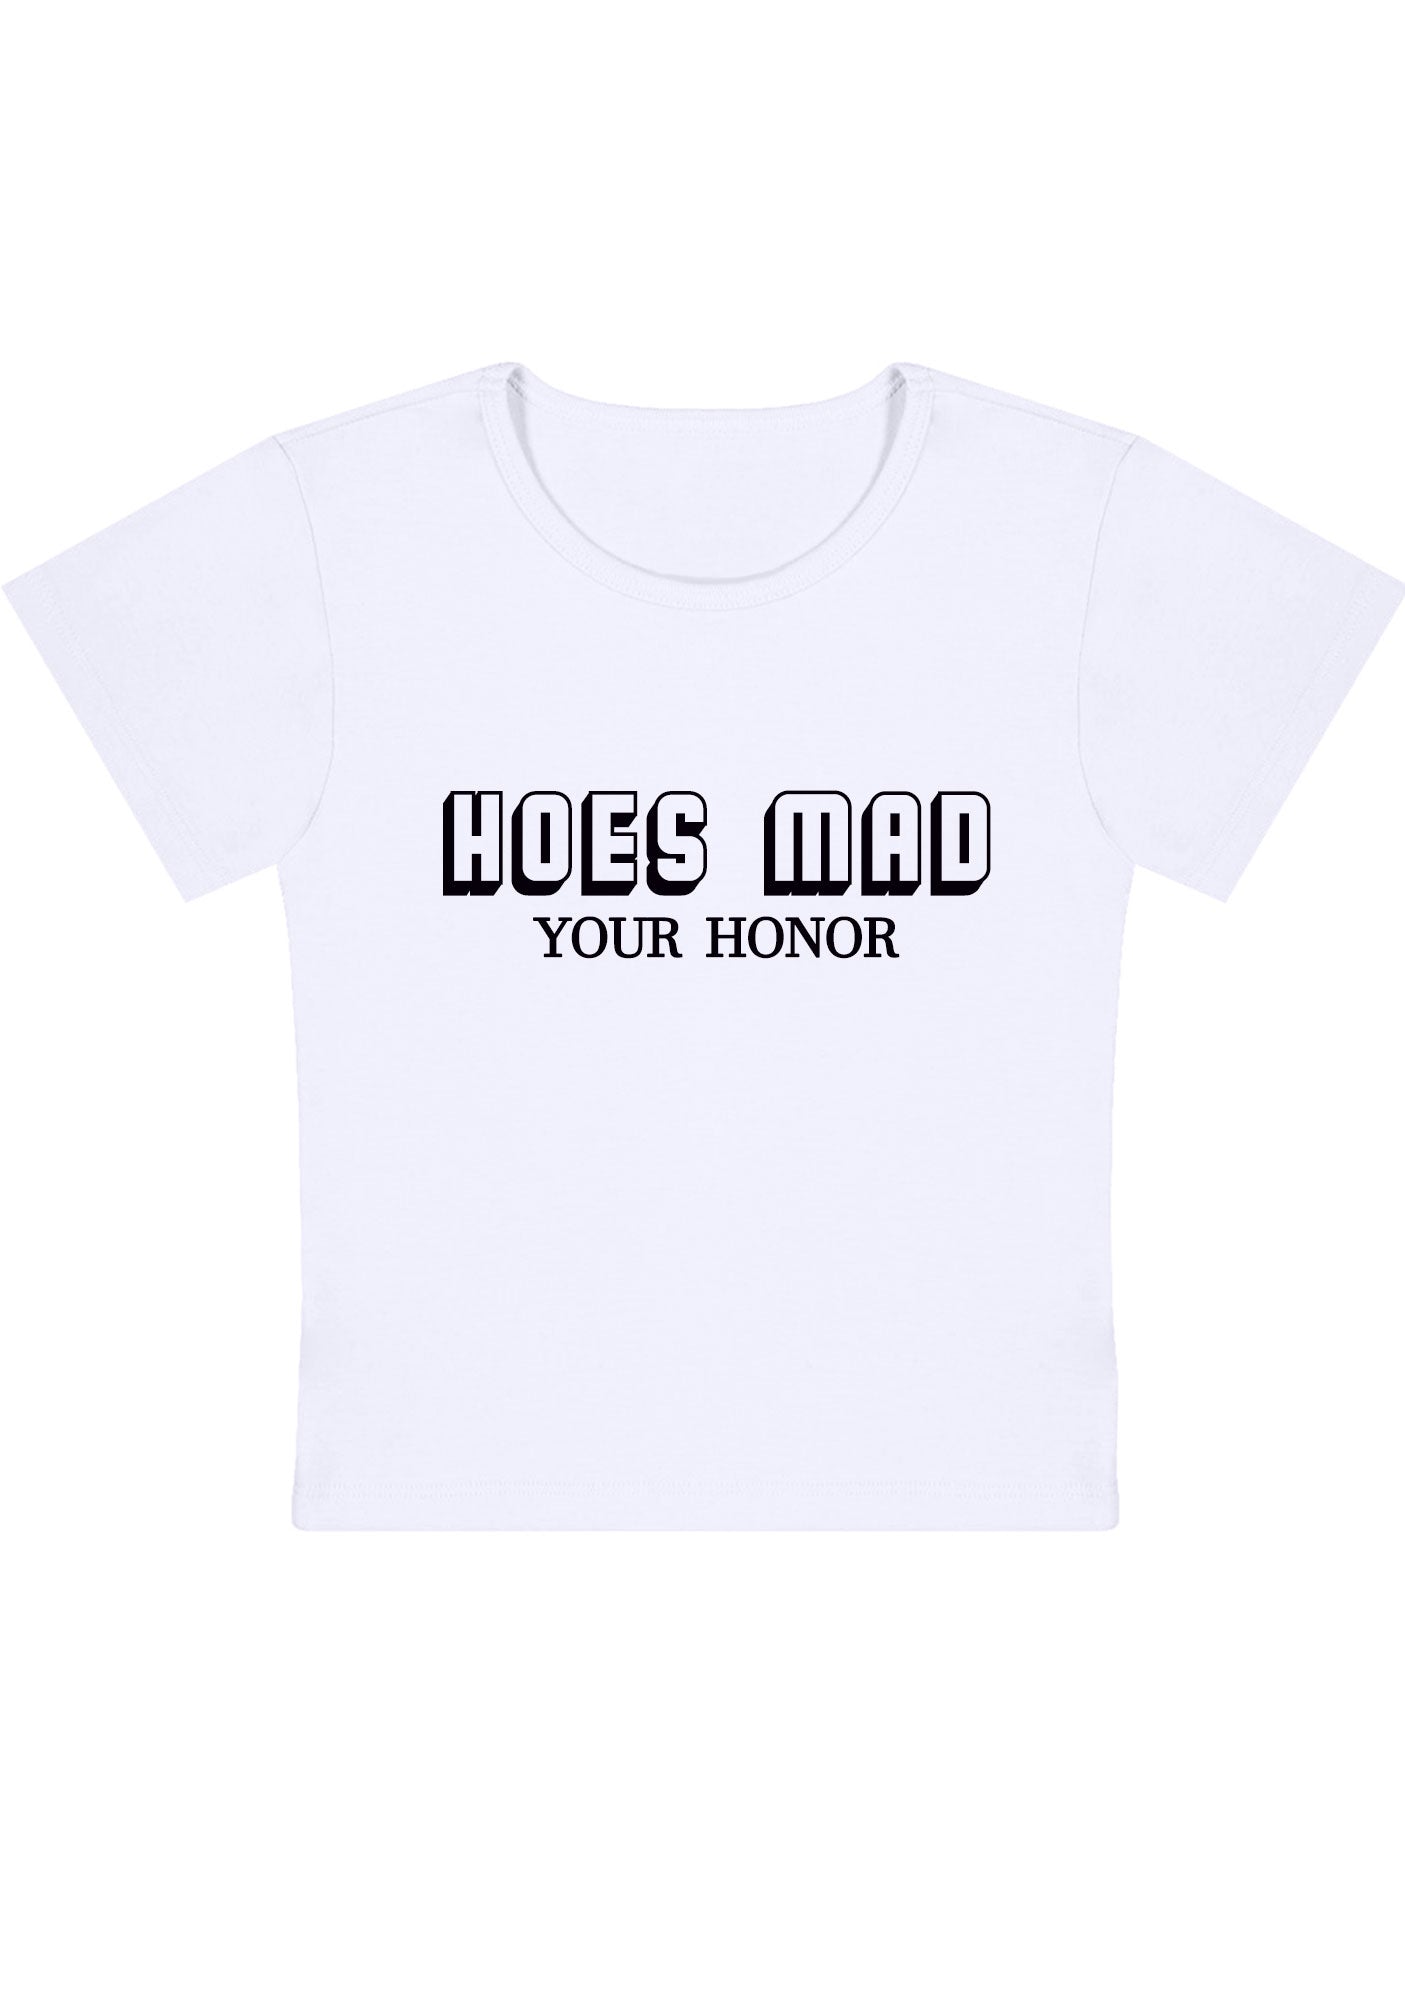 Hoes Mad Your Honor Y2K Baby Tee